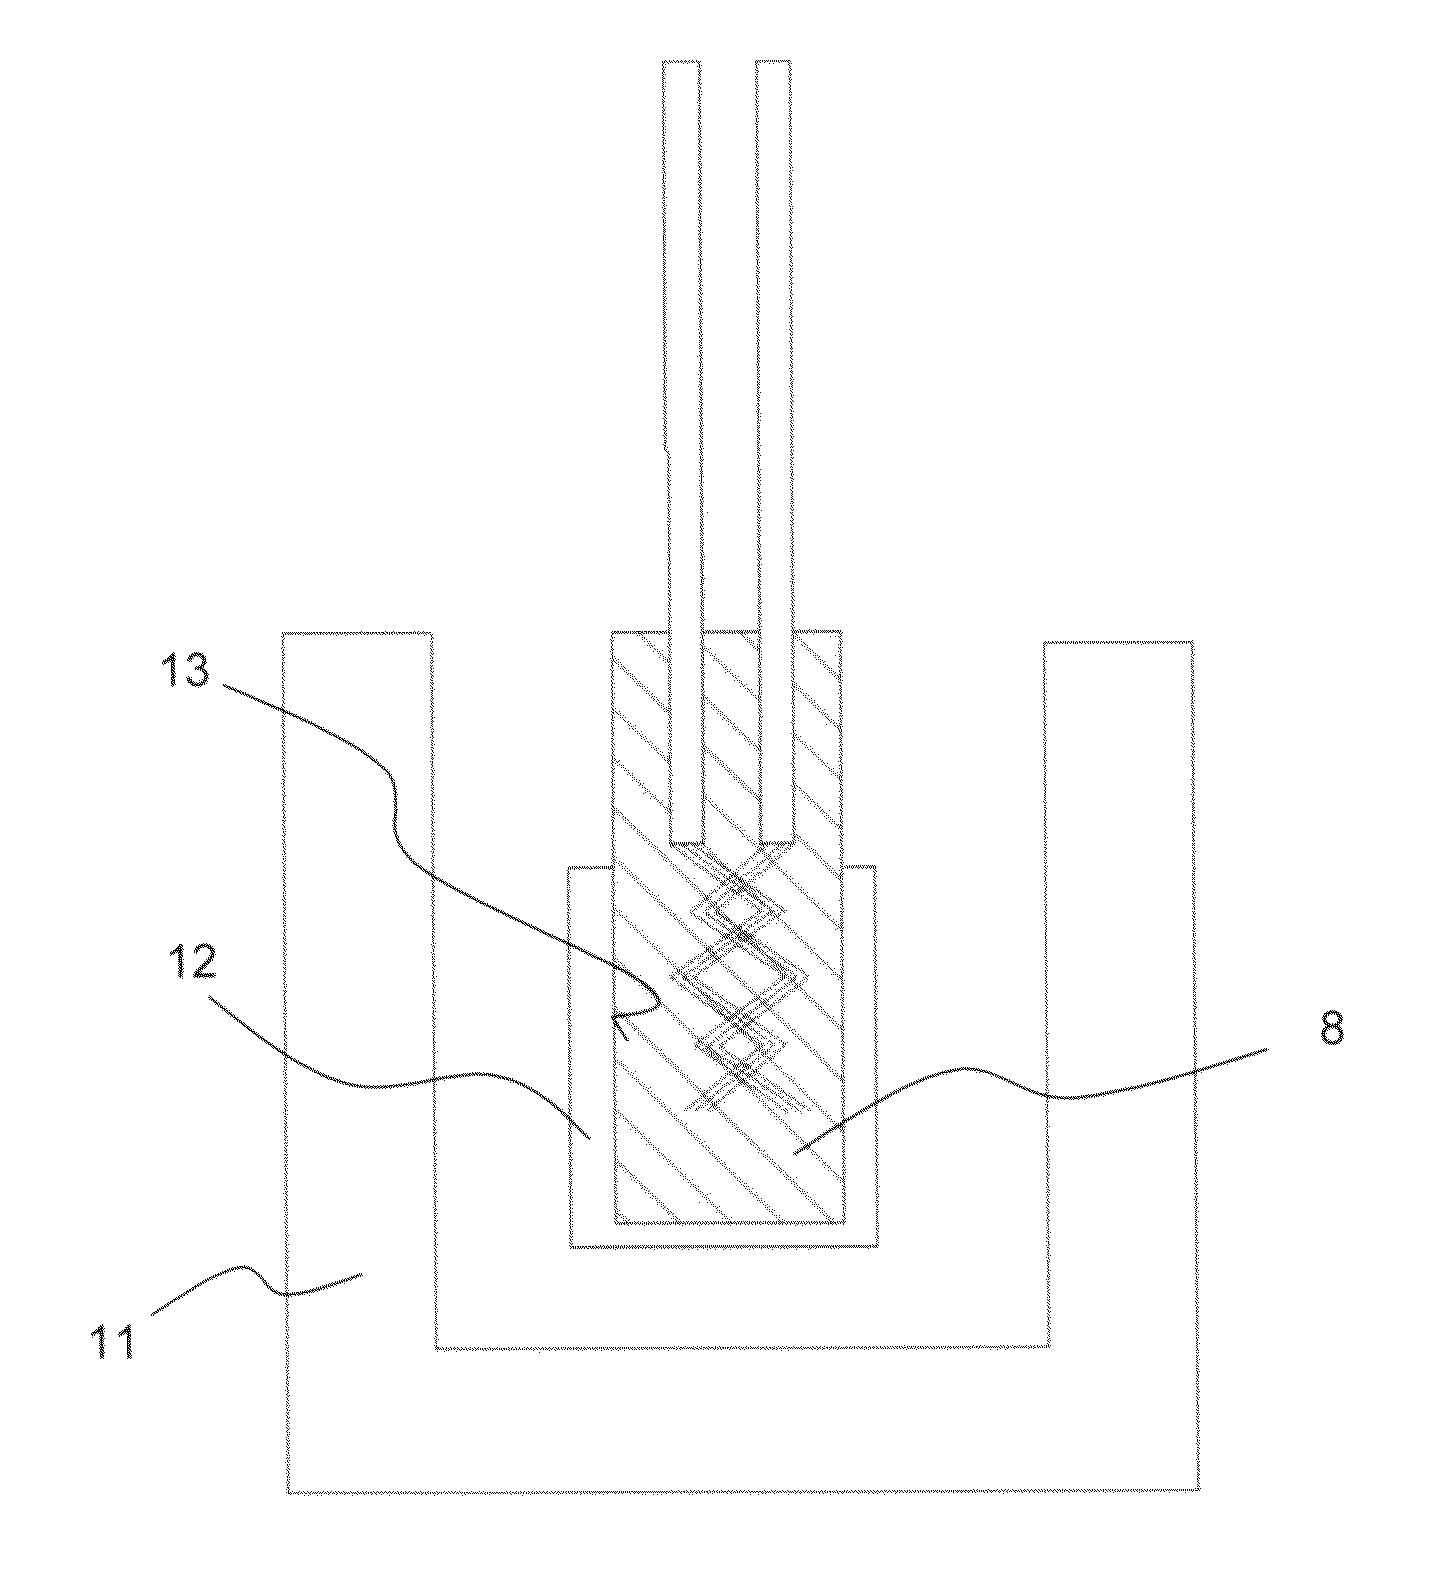 Method for superconducting connection between MgB2 superconducting wires via a MgB2 matrix made from a boron powder compressed element infiltrated with Mg